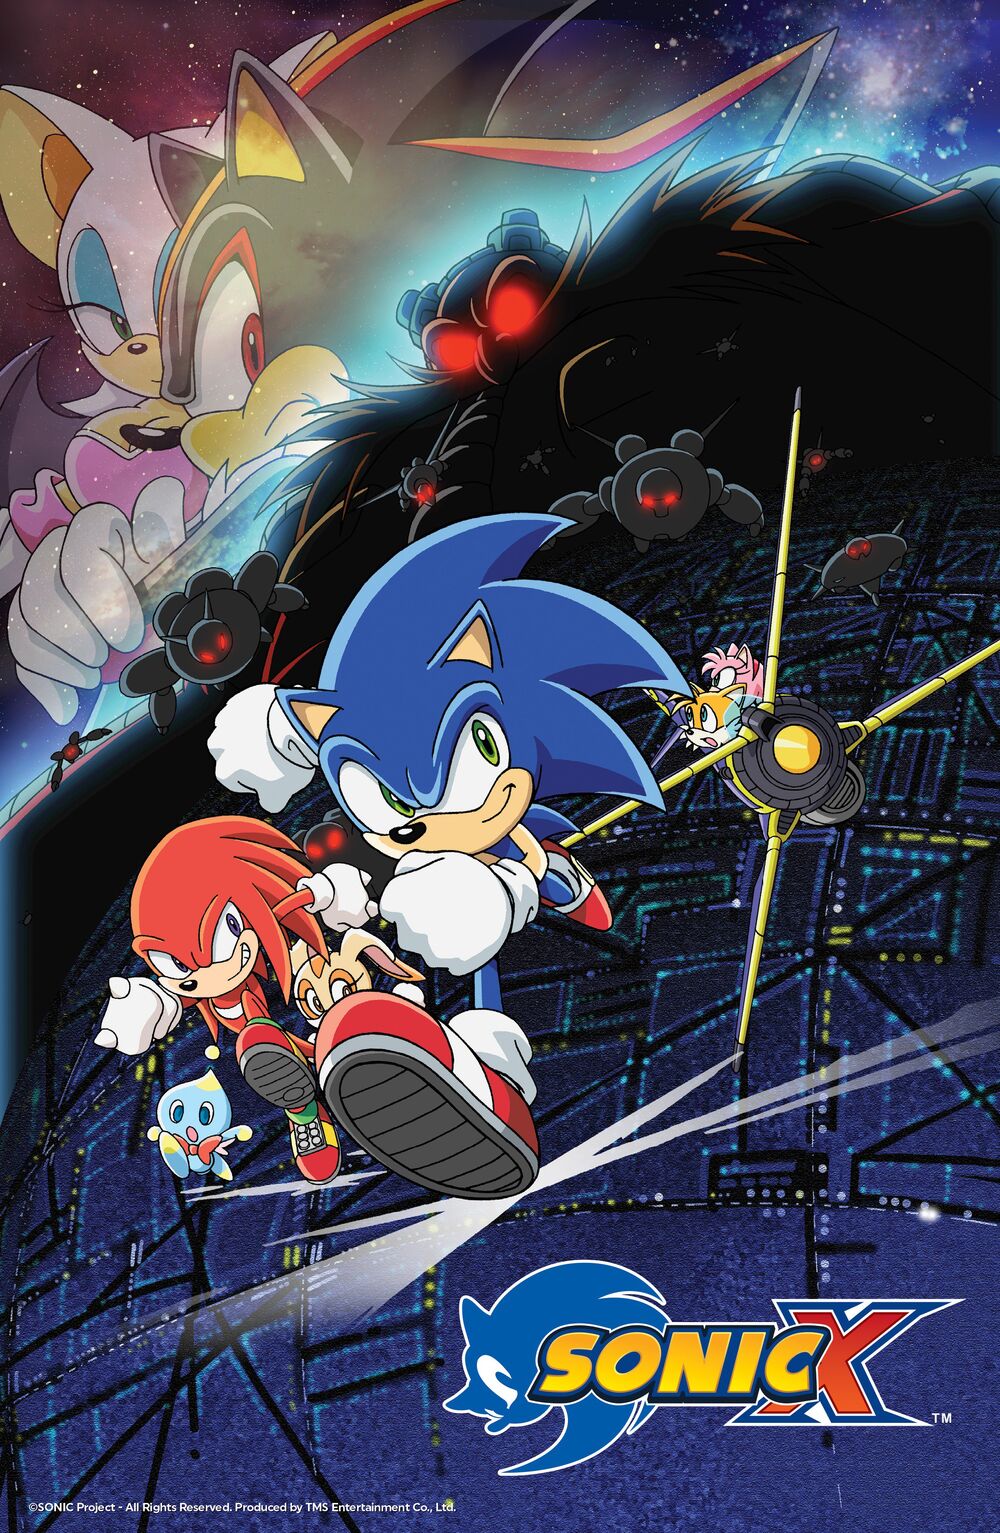 Cute Sonic Pictures In Sonic X: Episode 1 - Chaos Control Freaks